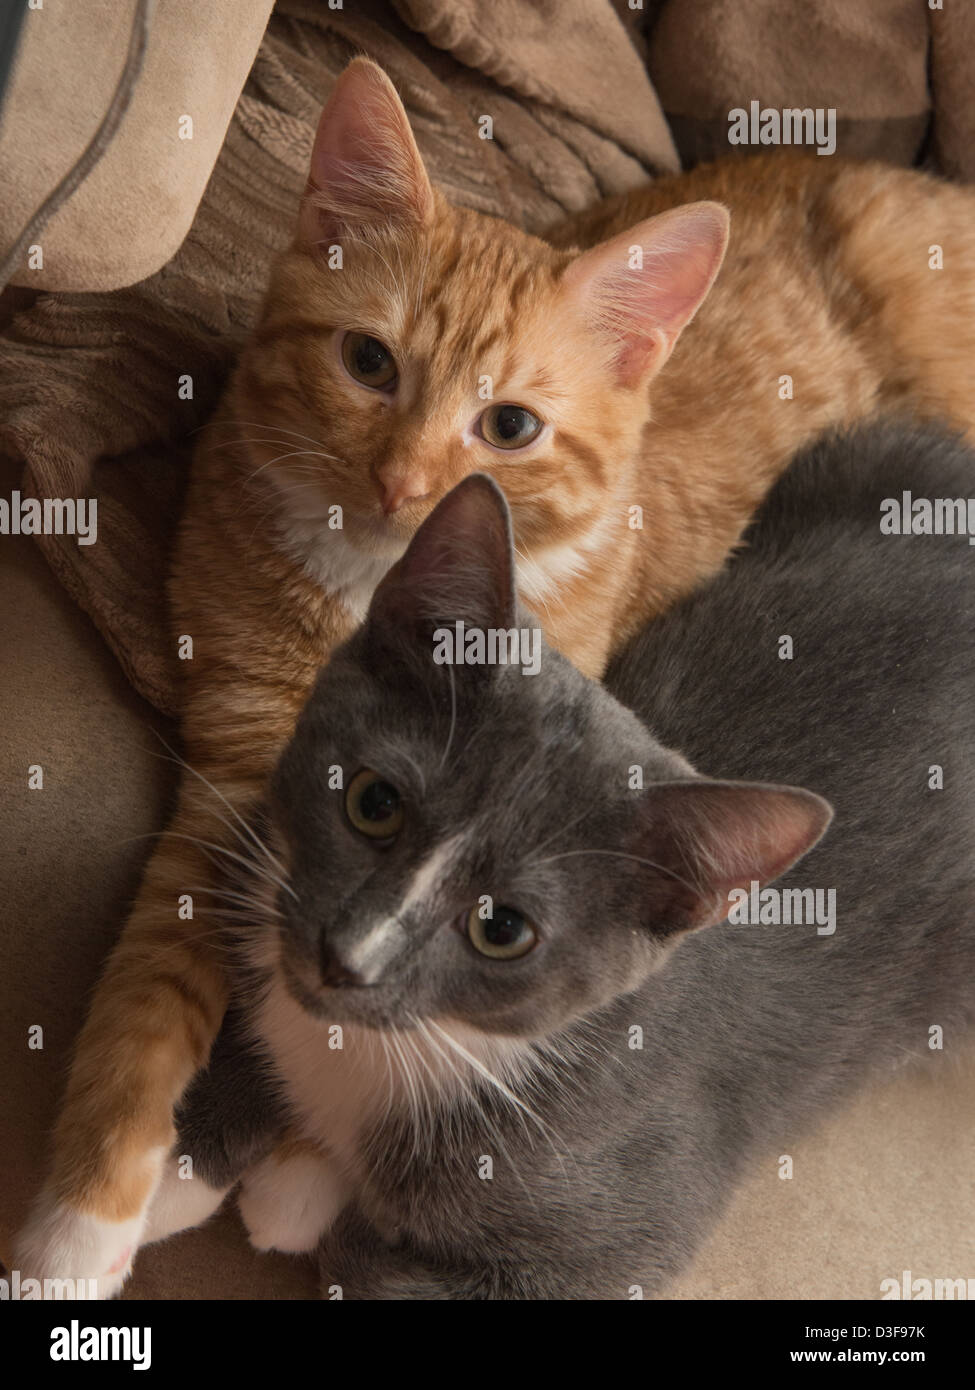 Two four month old kittens cuddling in a chair together Stock Photo